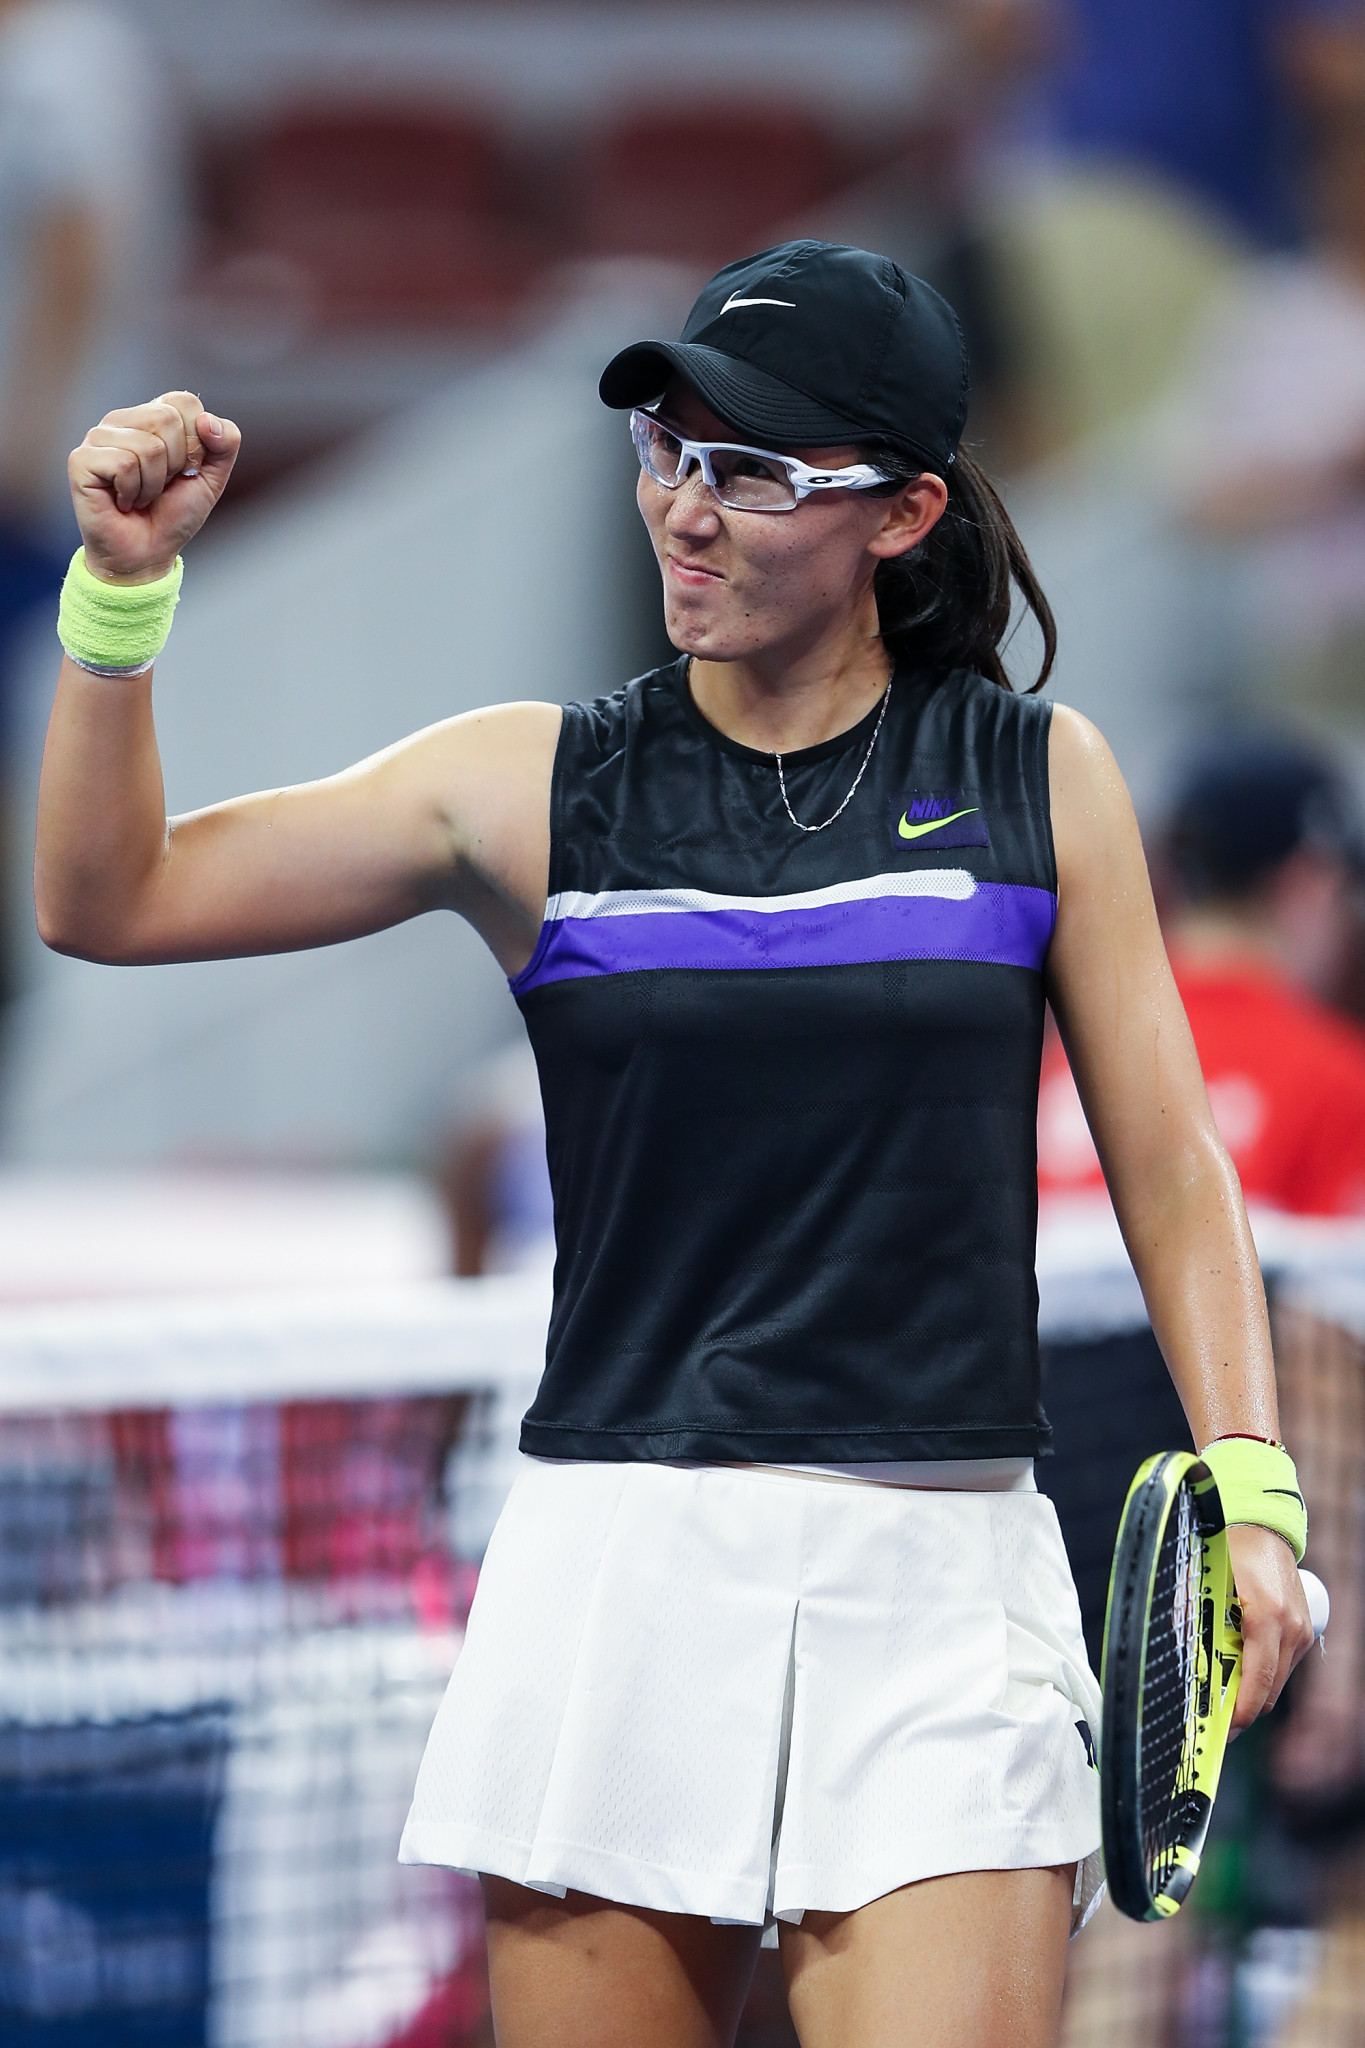 Zheng celebrates National Day with China Open win over Stephens